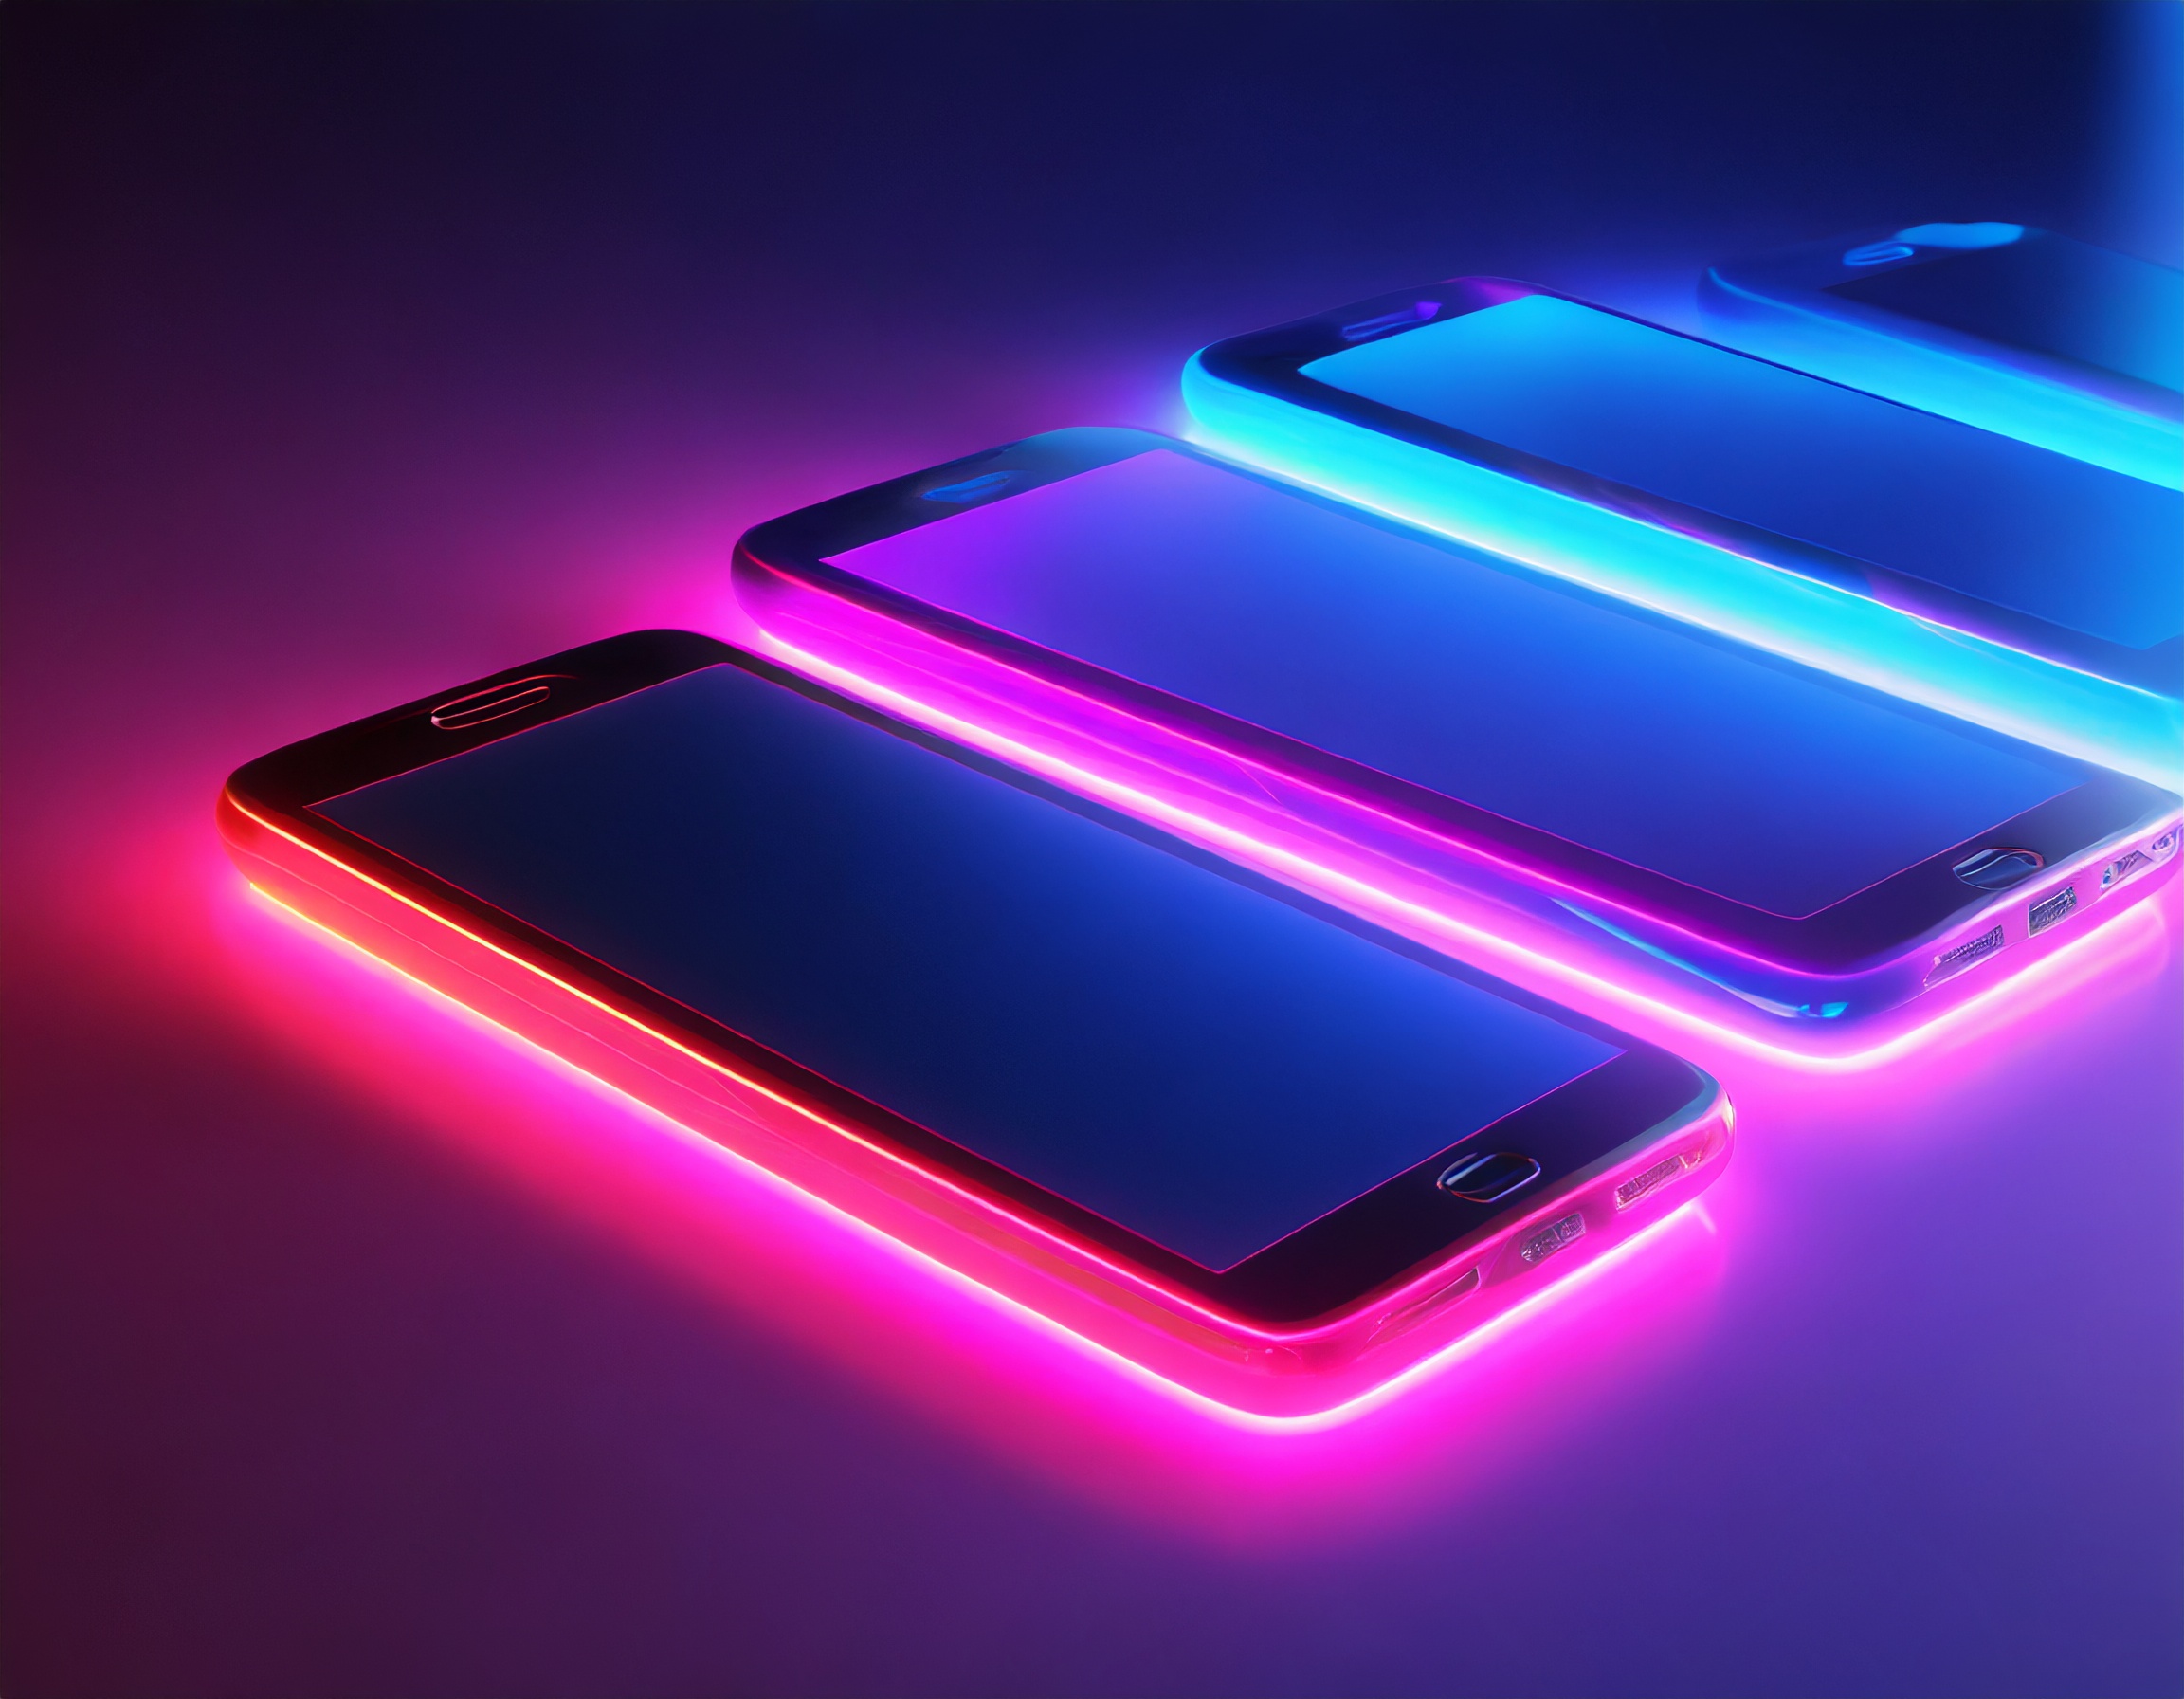 Futuristic smartphones and tablets with neon purple glow, symbolizing eSIM technology.